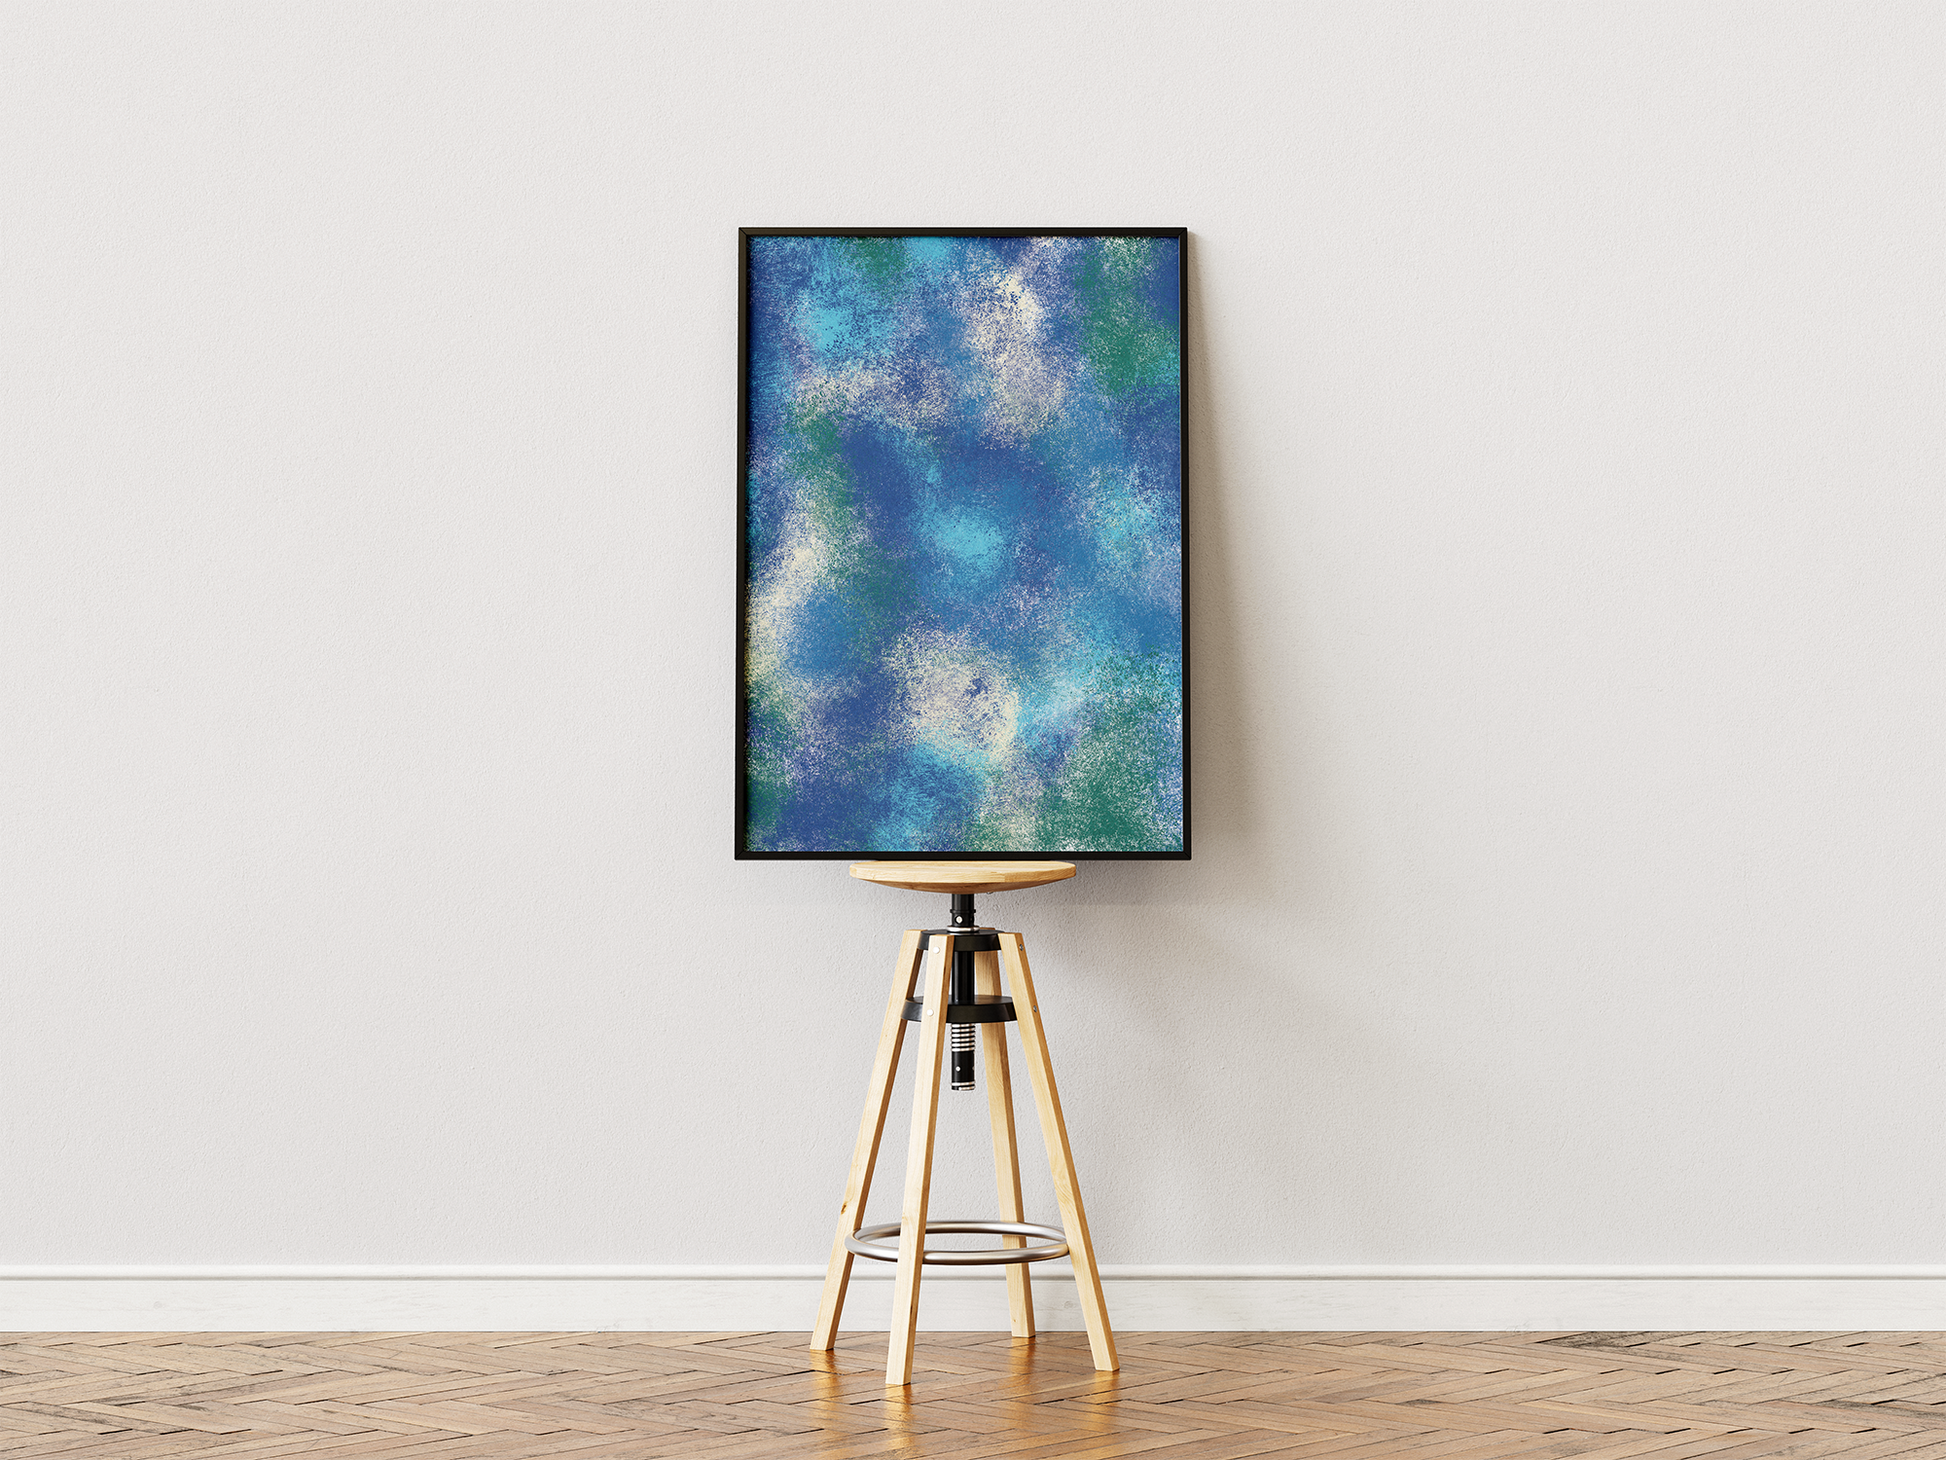 Free Printable artwork of a textural blue-green abstract design, reminiscent of sea foam and ocean waves, presented on a wooden easel as an eco-friendly decorative element